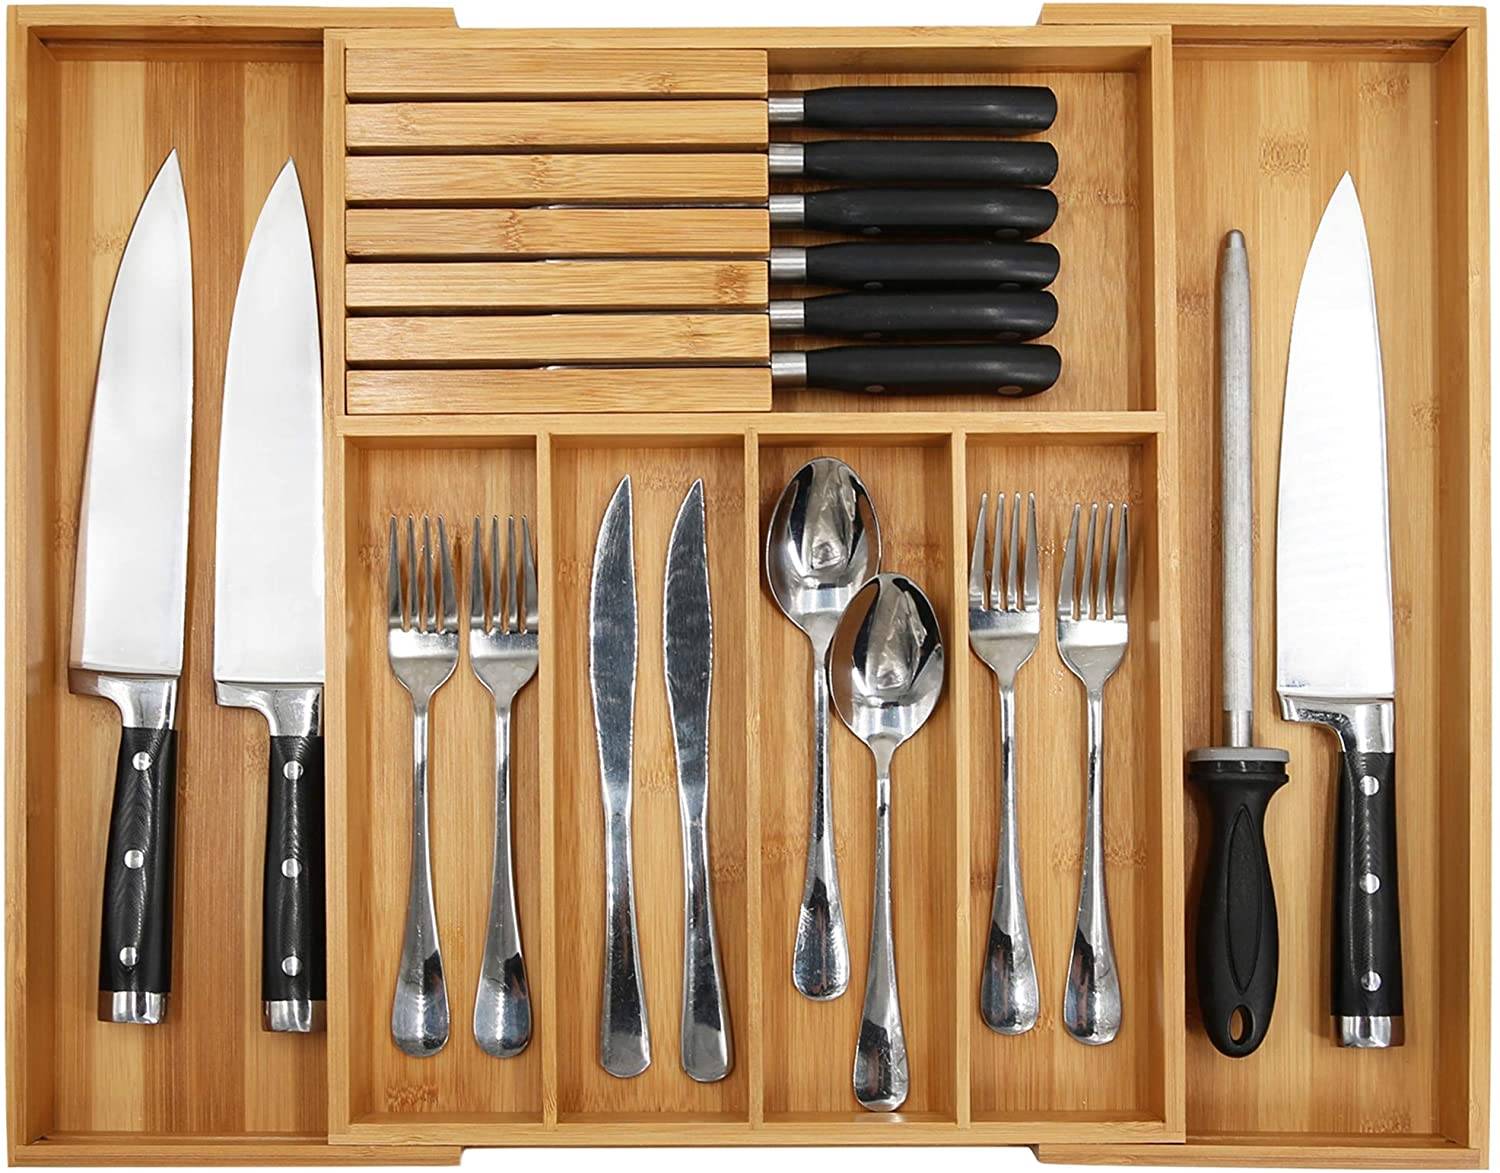 OEM Supply China Bamboo Silverware Drawer Organizer Kitchen, Expandable Utensil Holder and Cutlery Tray with Divider and Knife Block Featured Image